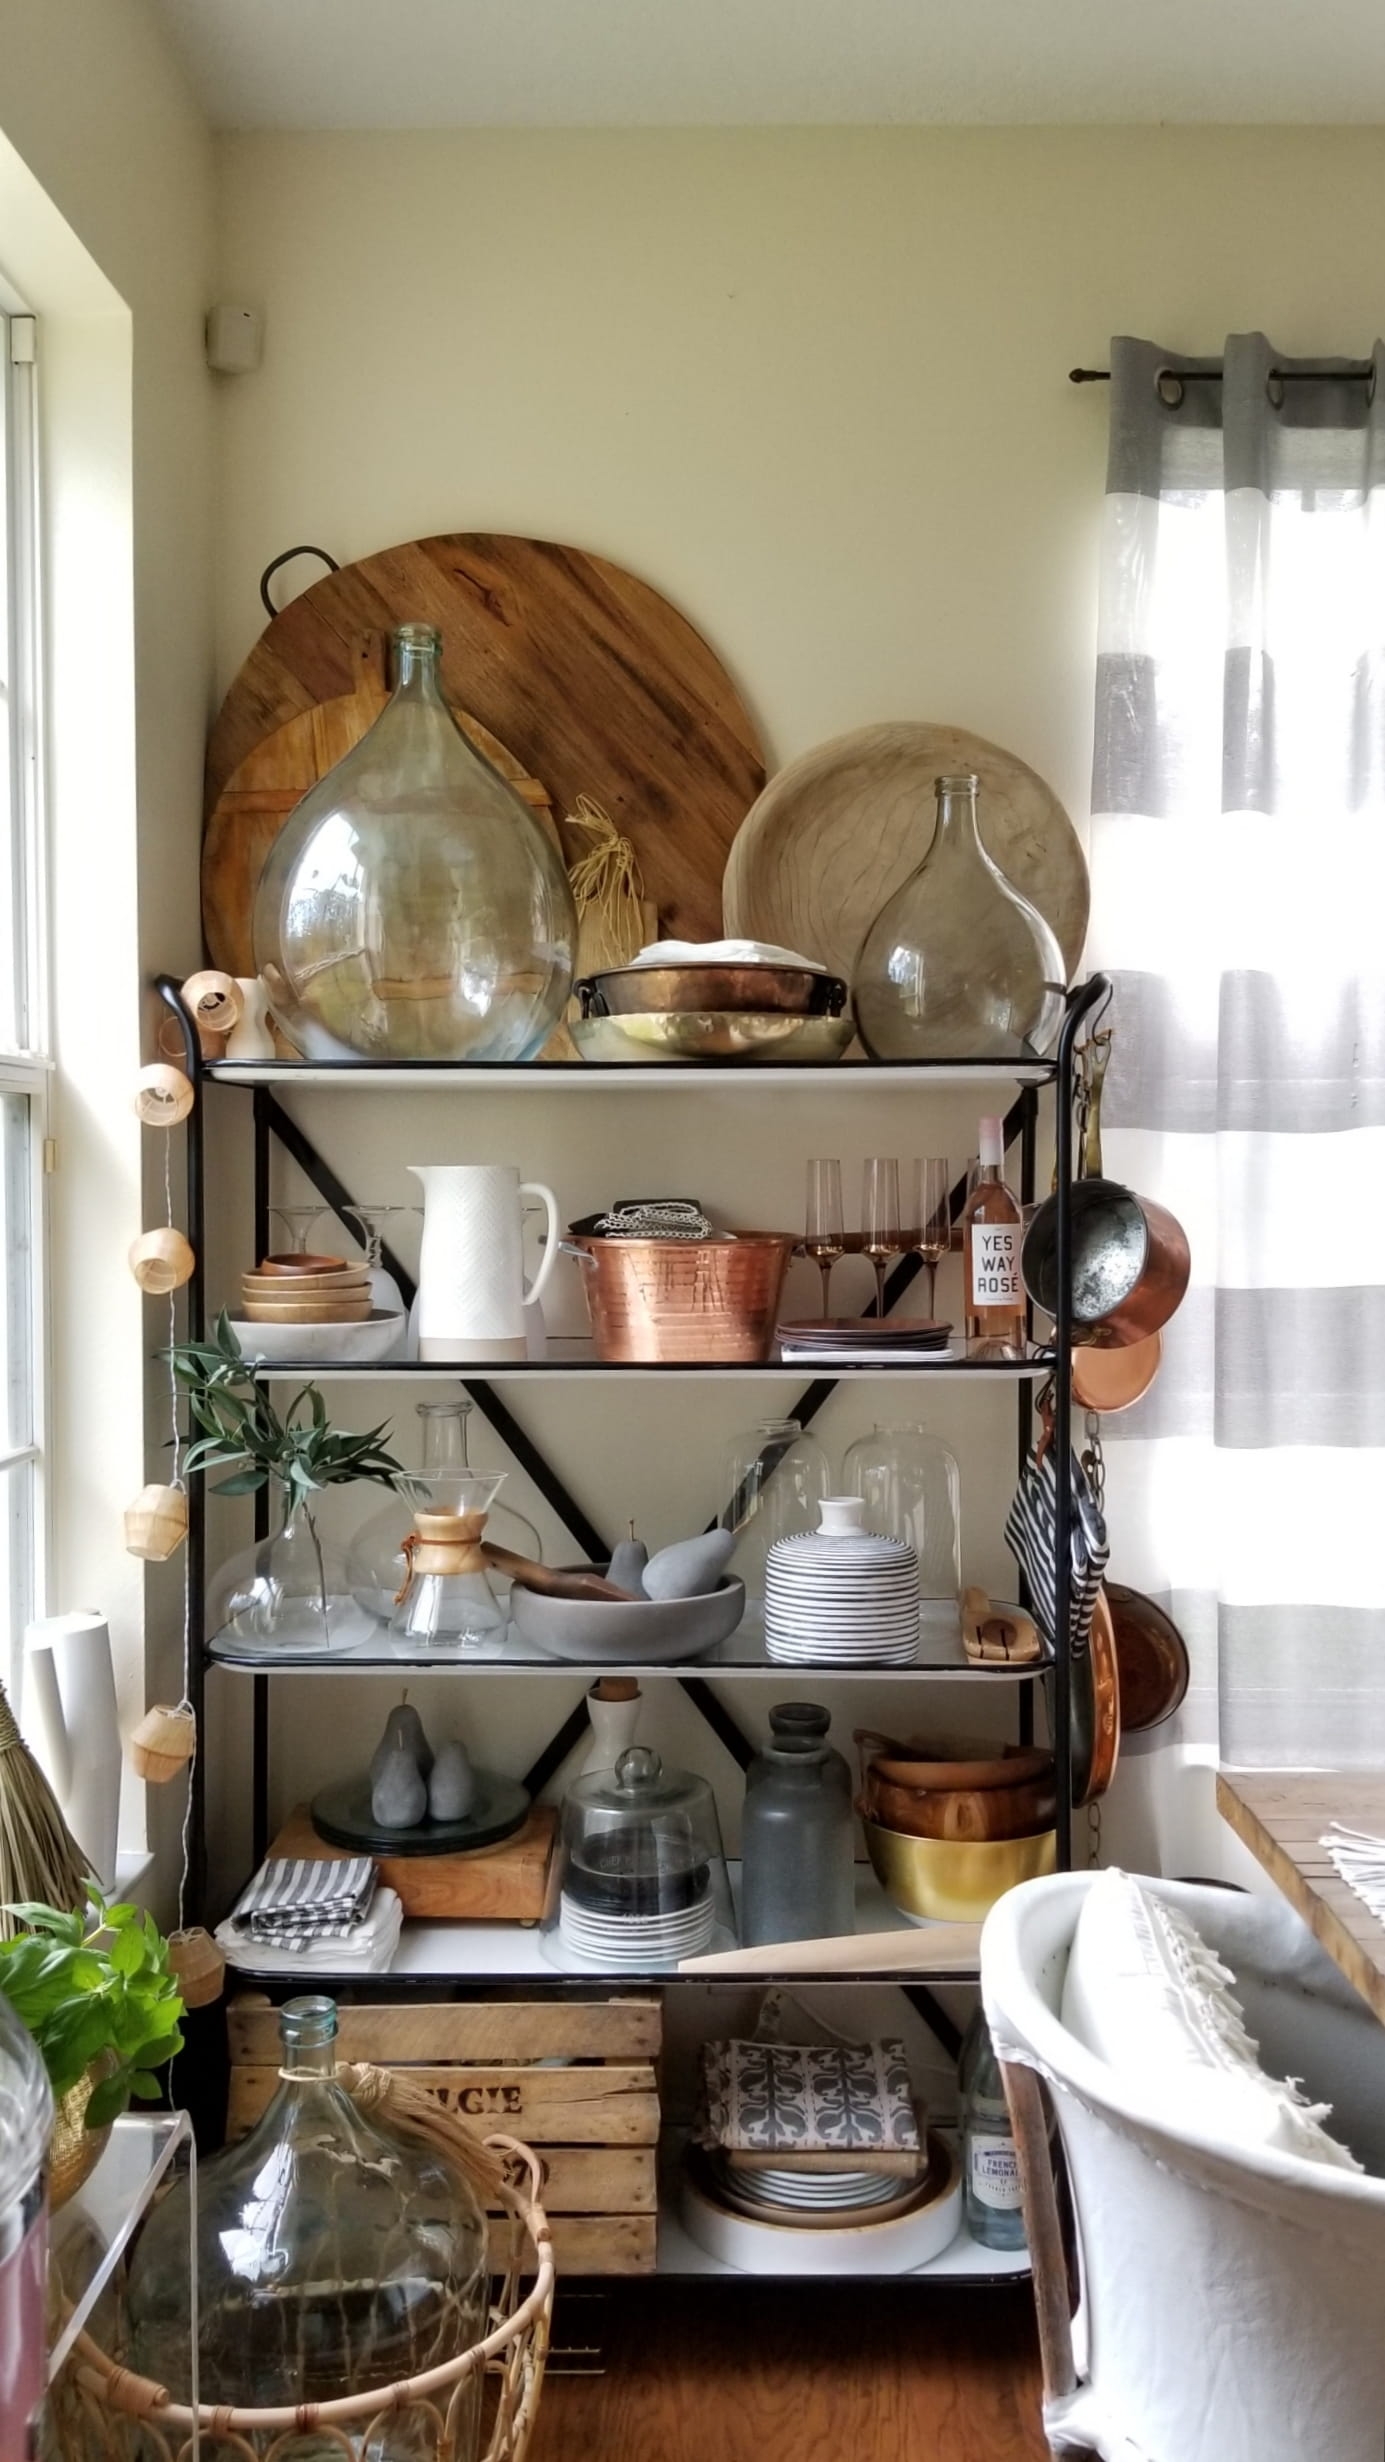 Rustic Modern European French Farmhouse Copper White Black Decor Design Home Interior Inspiration Kitchen Dining Room Farmhouse Table Open Shelving Baskets Pottery Rolling Cart At Home